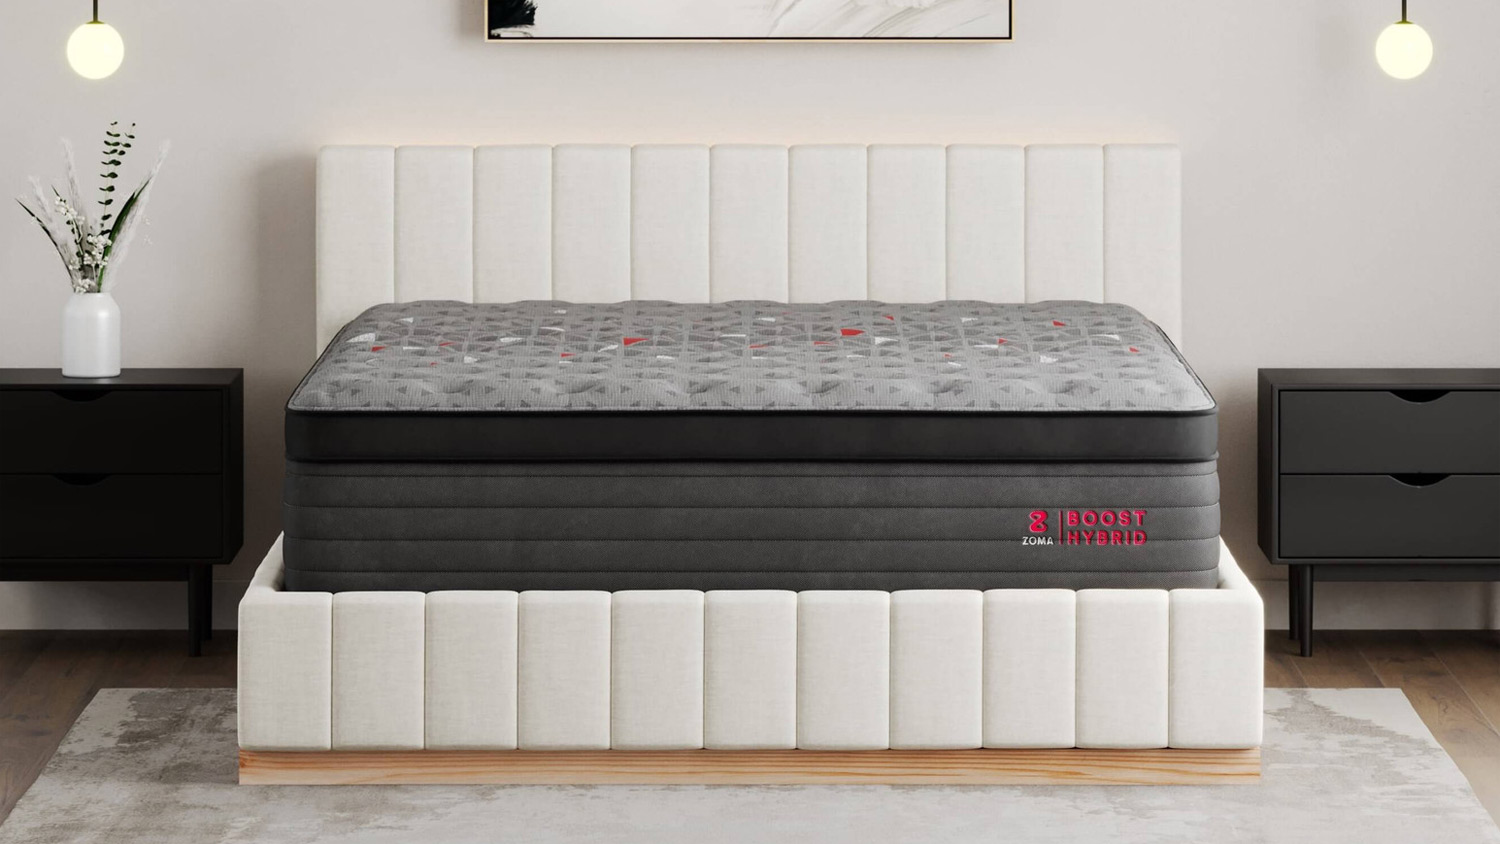 The Zoma Boost mattress on a bed, in a bedroom